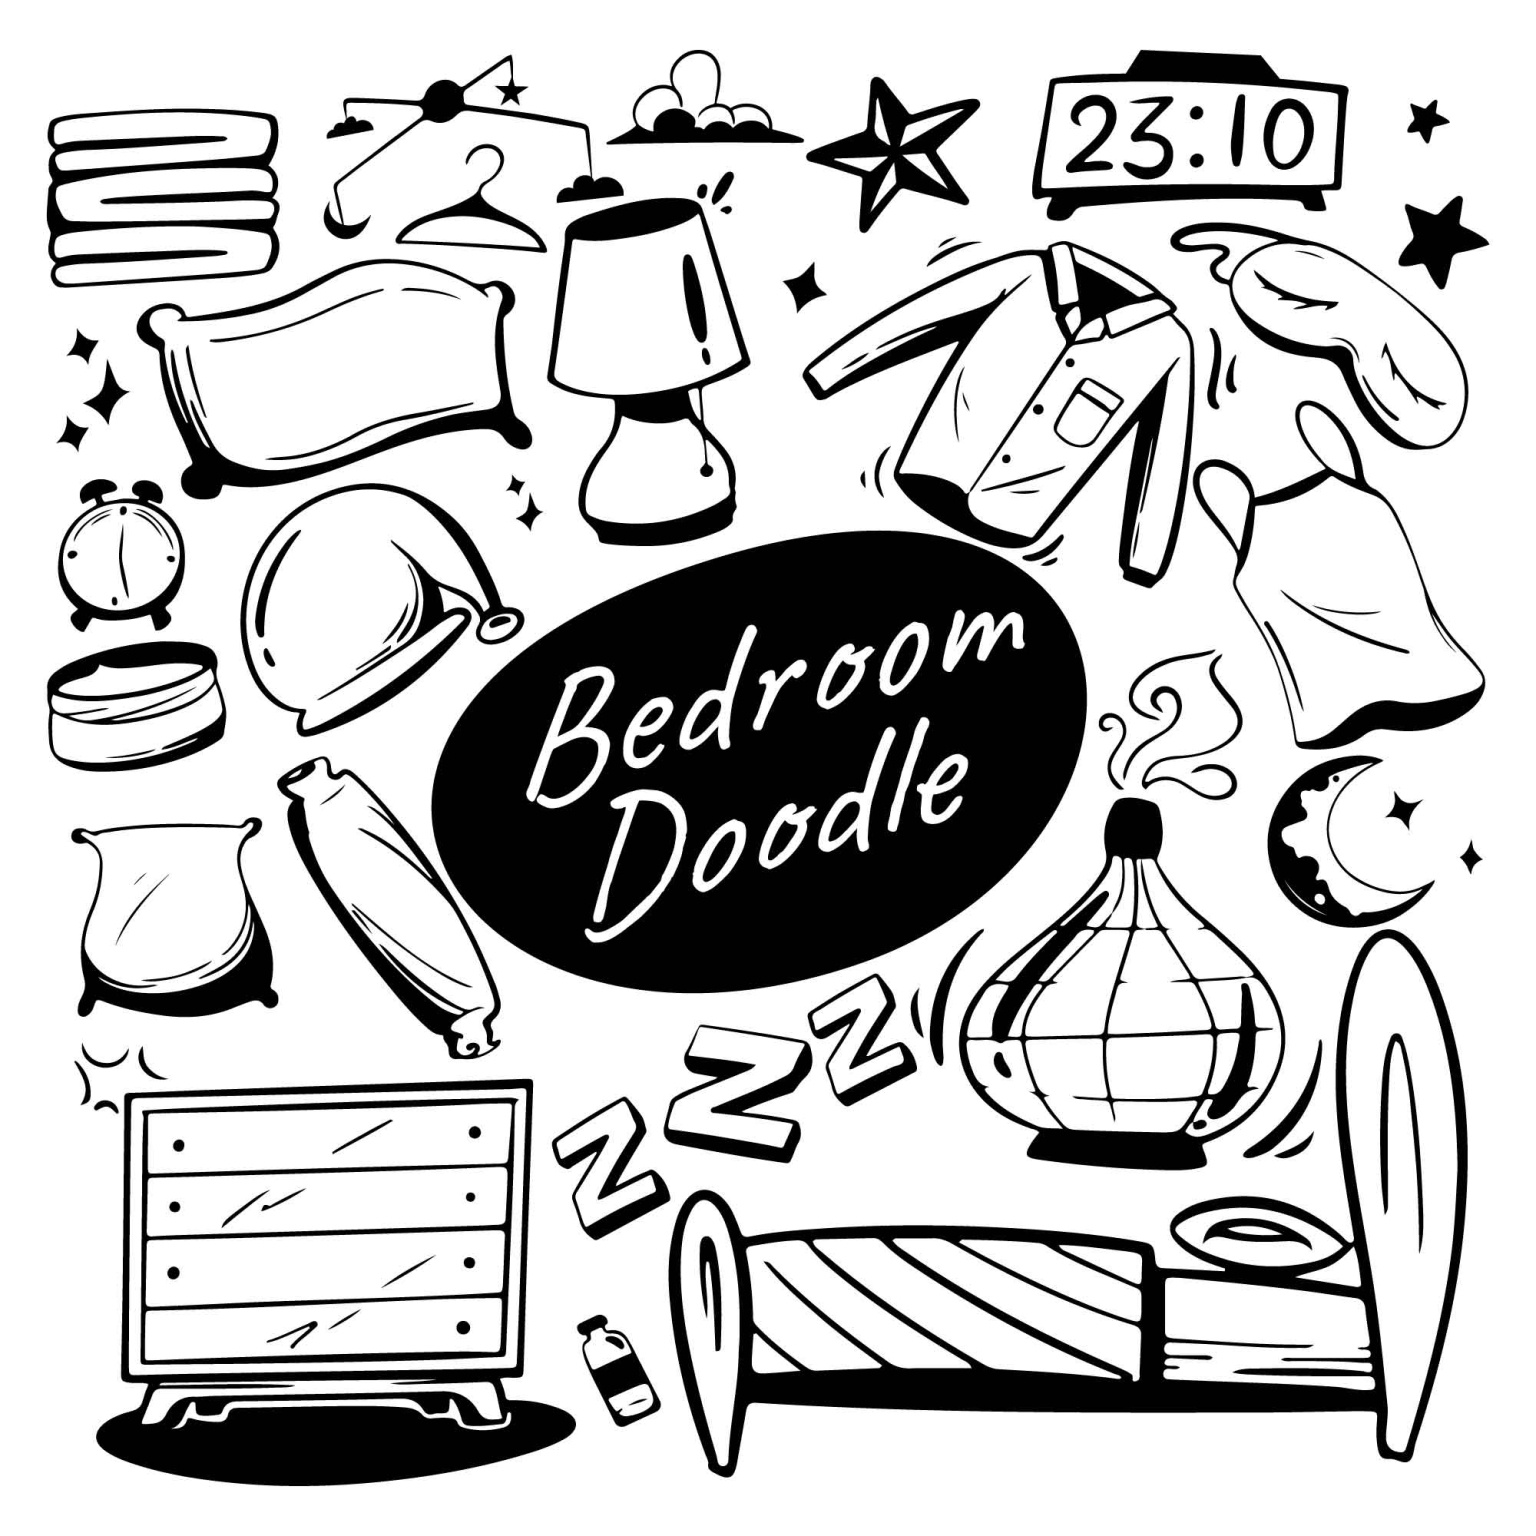 27-free-bedroom-doodles-by-unblast-on-dribbble